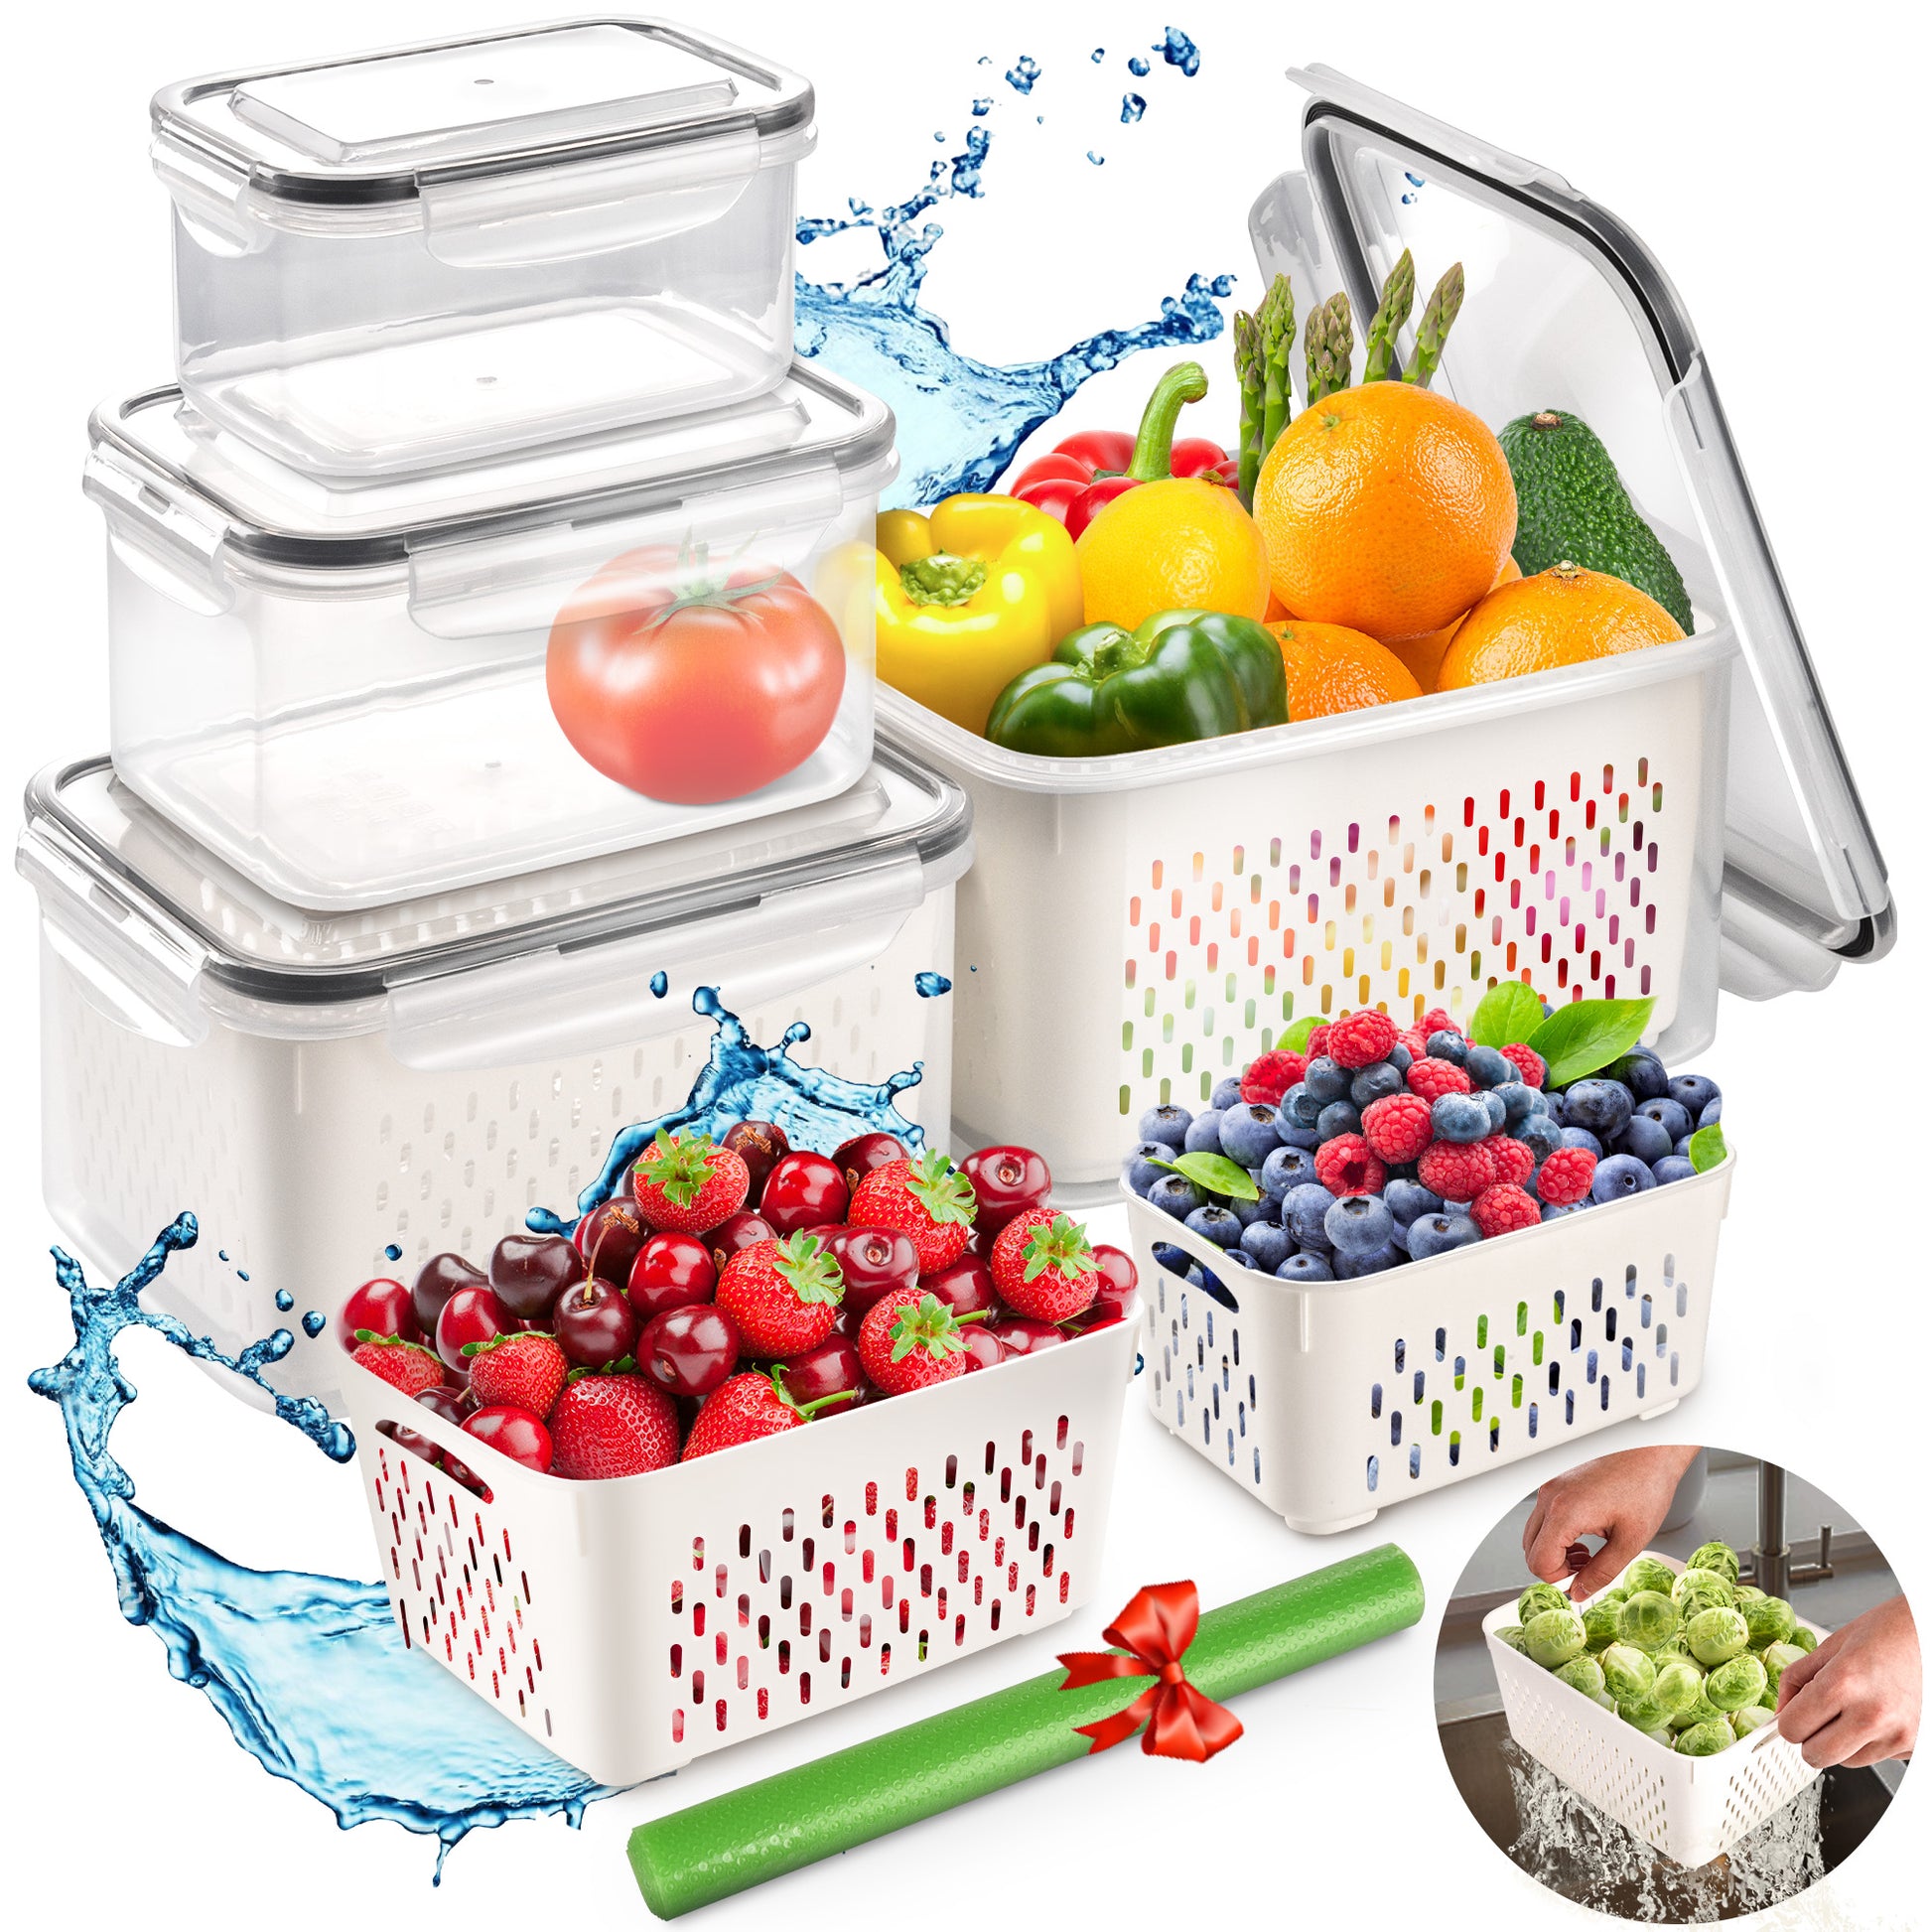 Fruit Containers for Fridge - Leakproof Food Storage Containers with  Removable Colander - Dishwasher & microwave safe Produce Containers Keep  Fruits